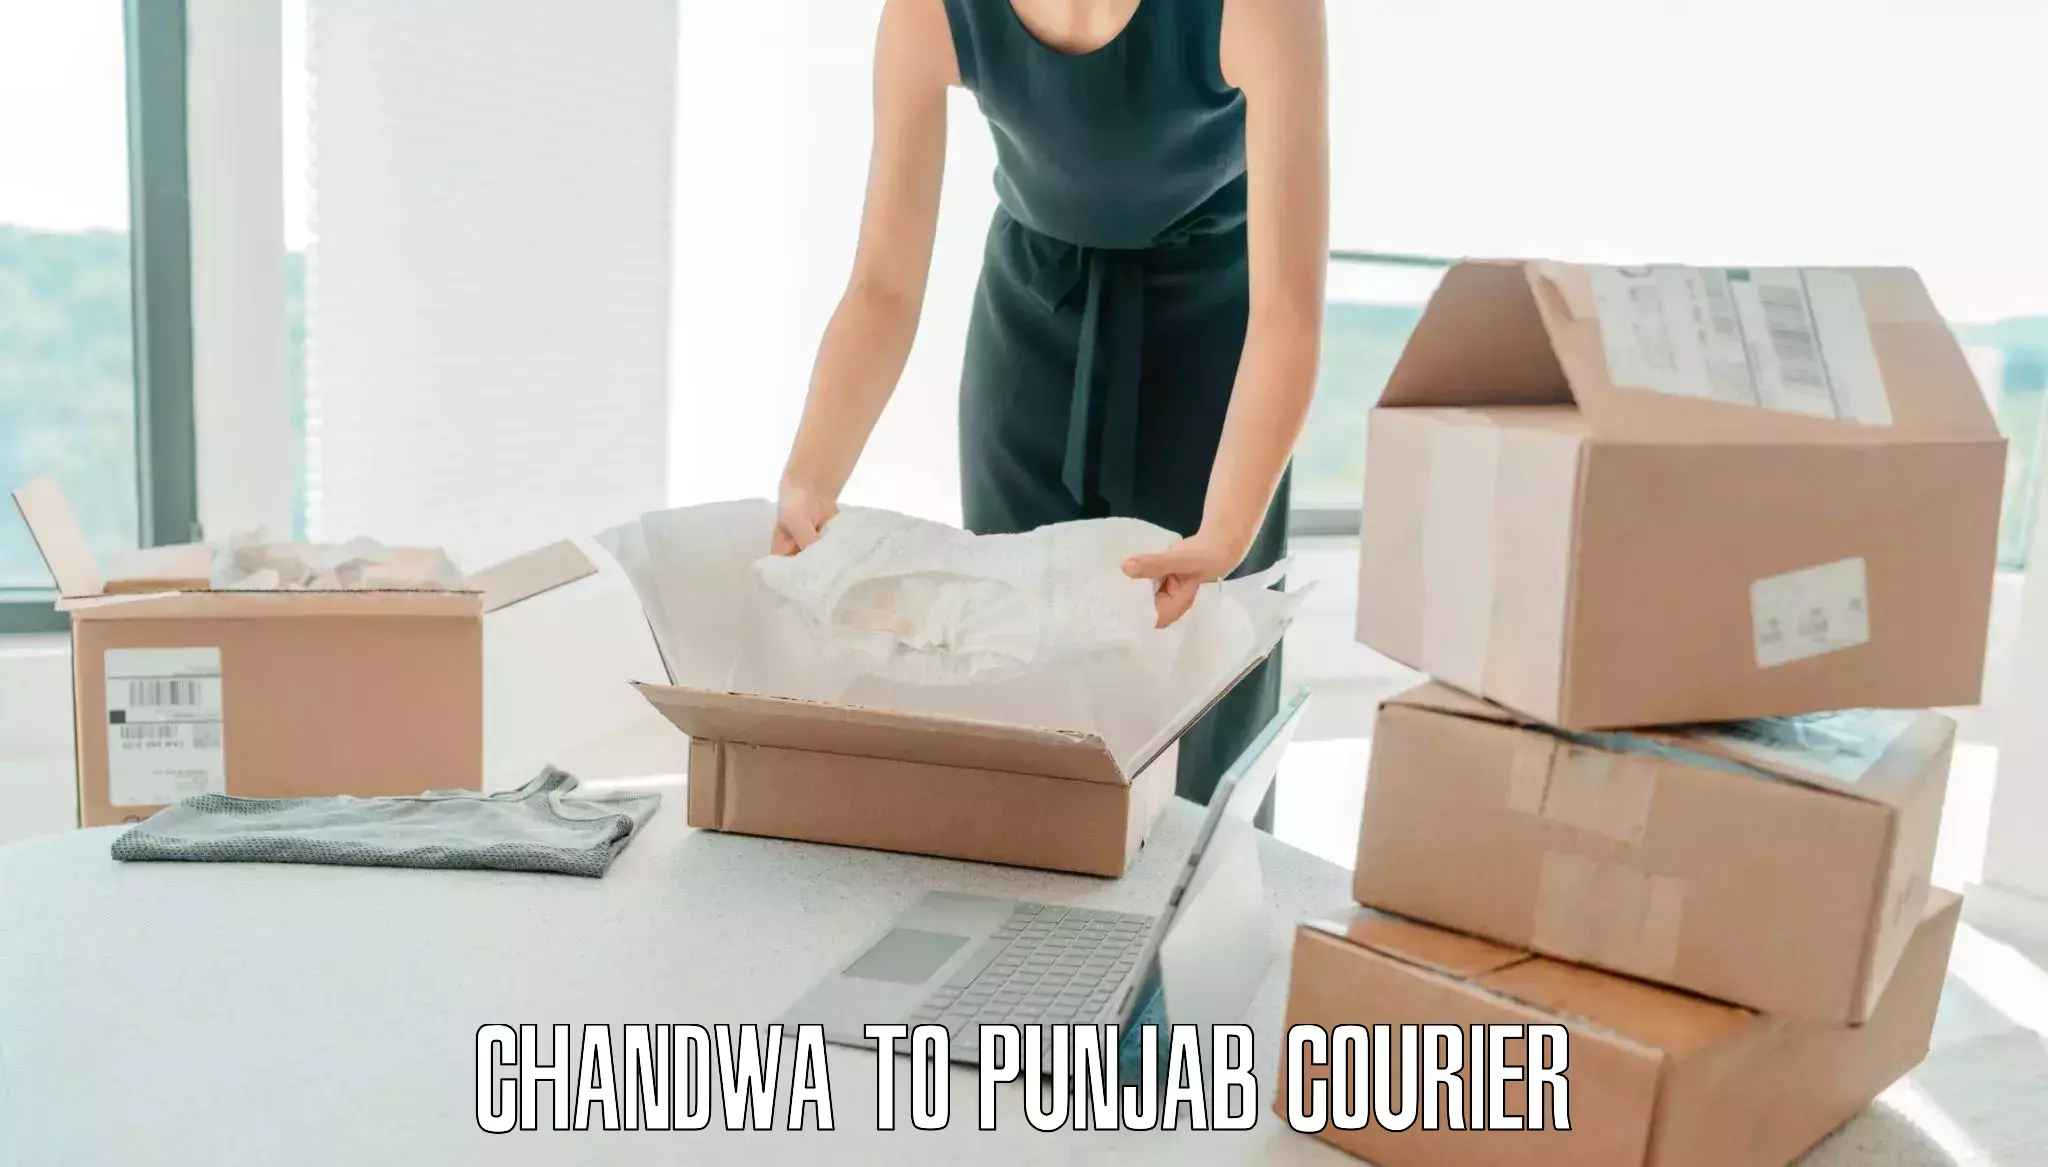 Holiday season luggage delivery Chandwa to Mohali